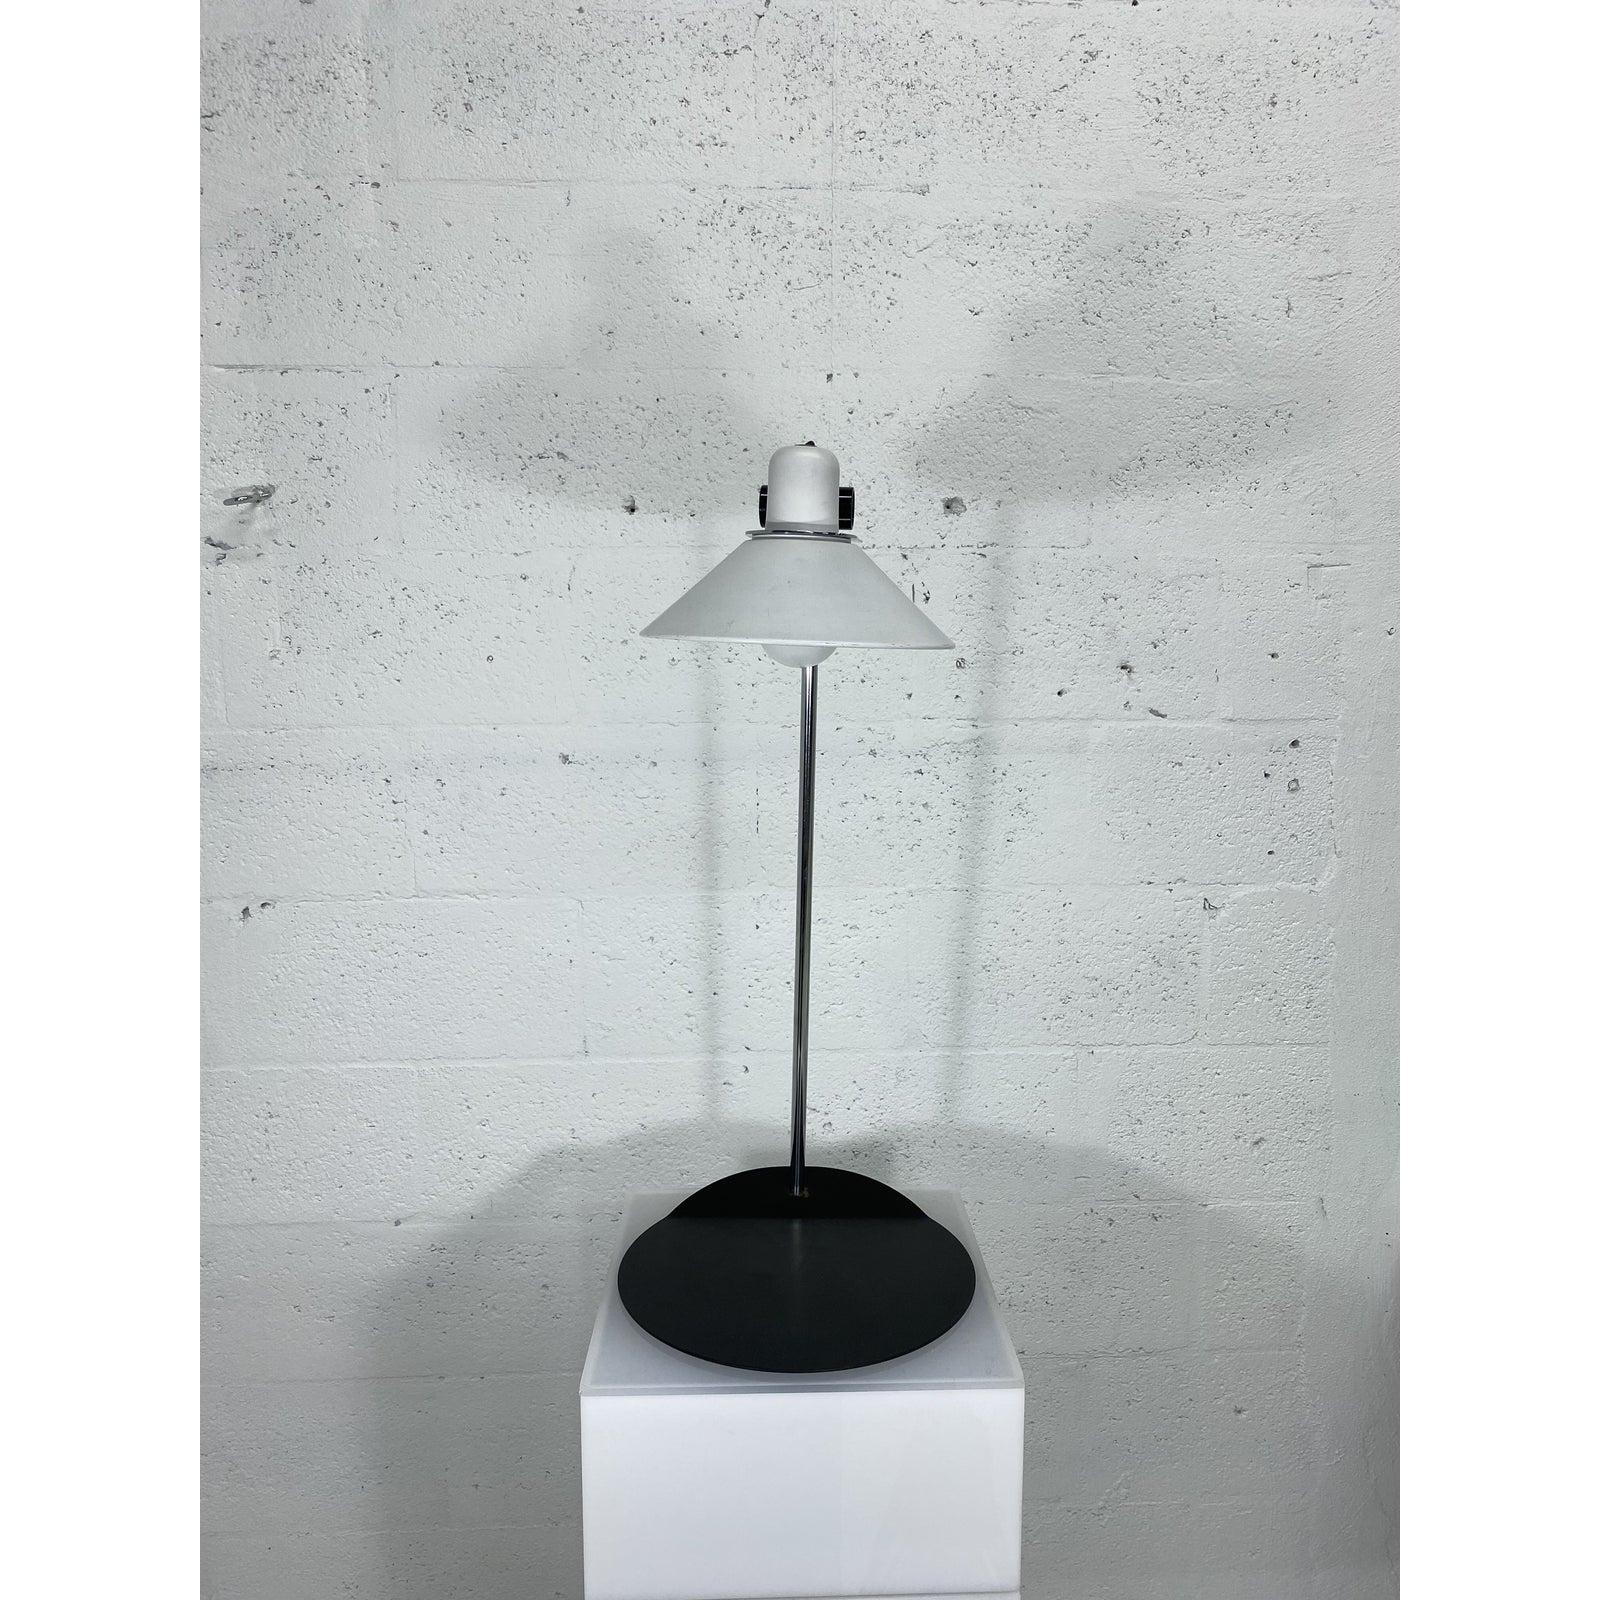 Postmodern lamp with white enameled shade supported by a chrome stem and mounted on a black steel base. The shade tilts back and forth. Not height adjustable.